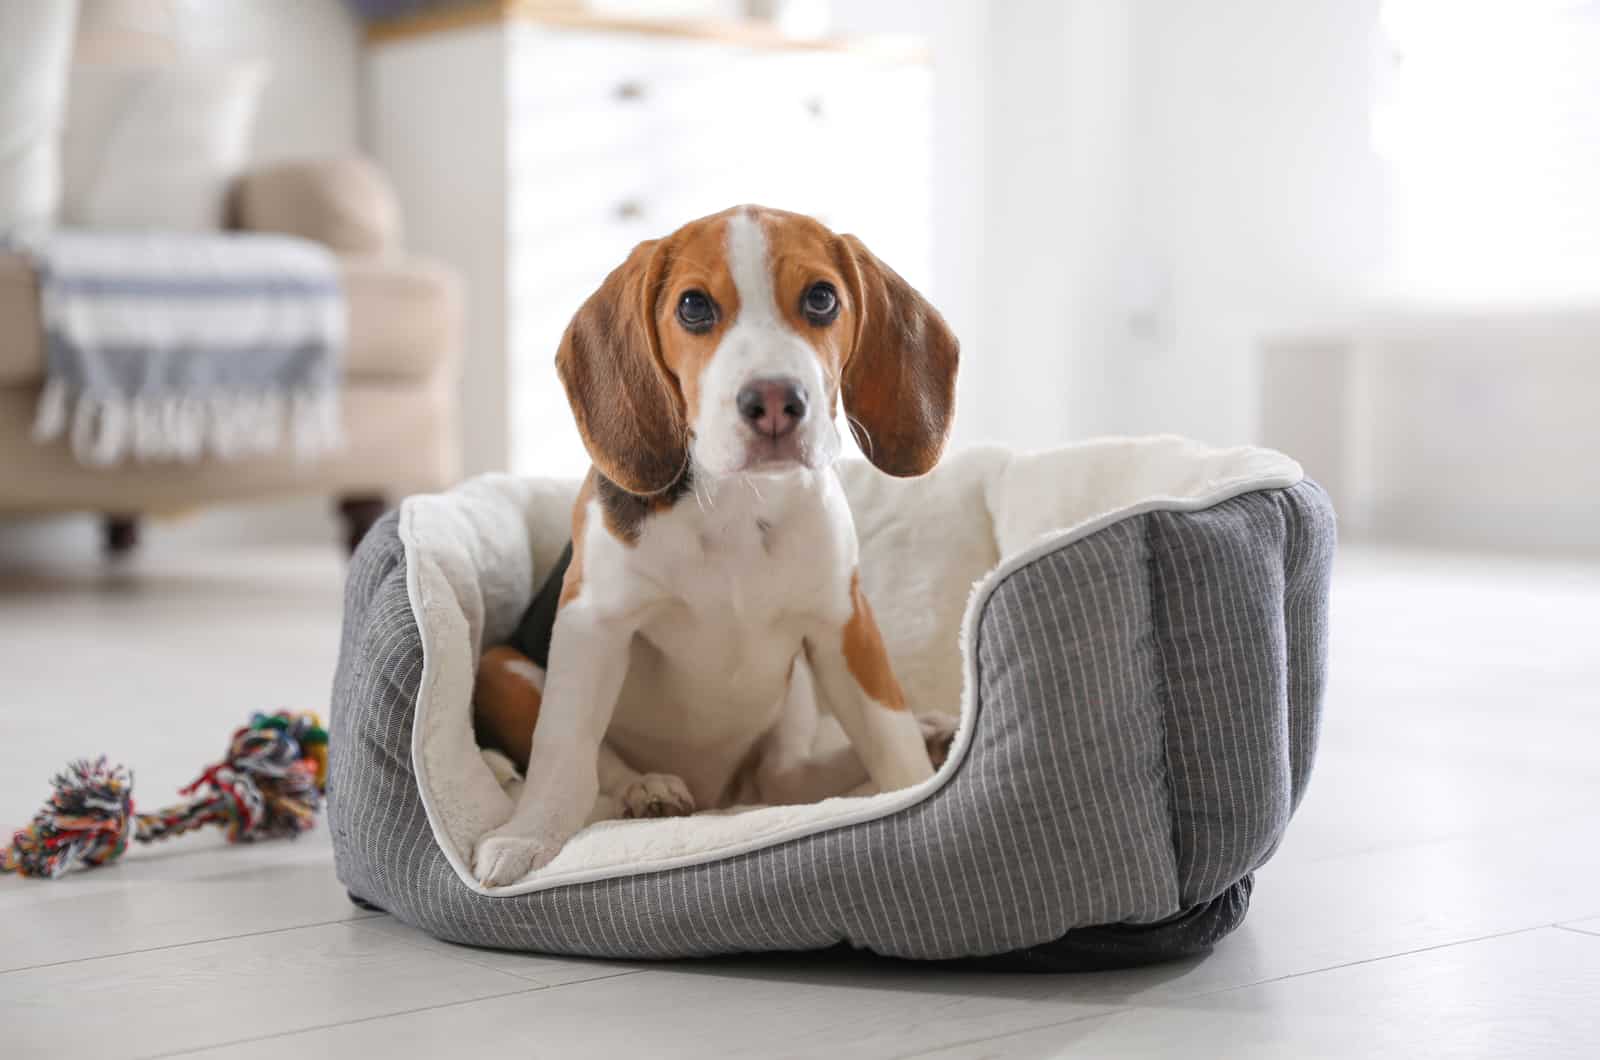 Cute Beagle puppy in dog bed at home